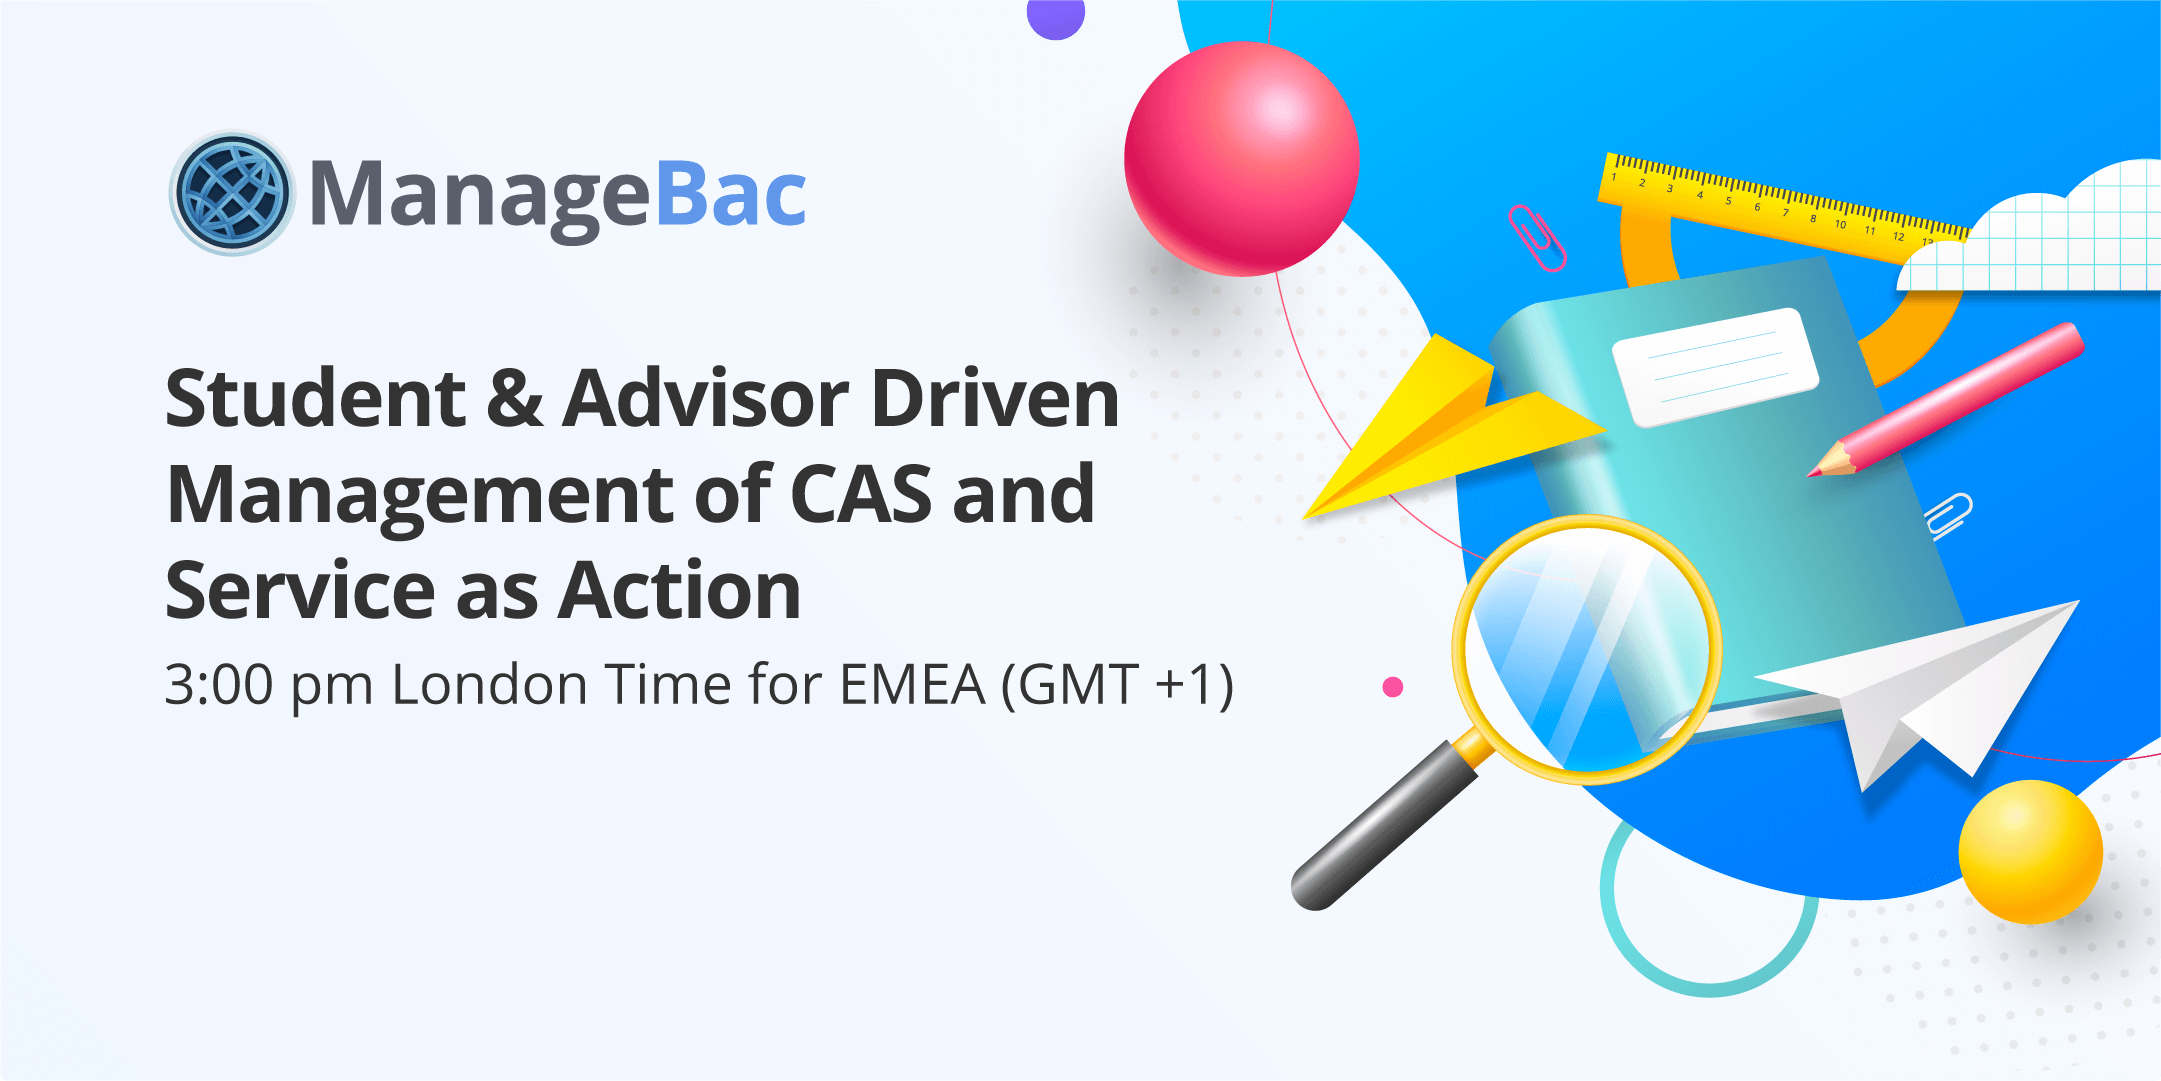 Student & Advisor Driven Management of CAS and Service as Action